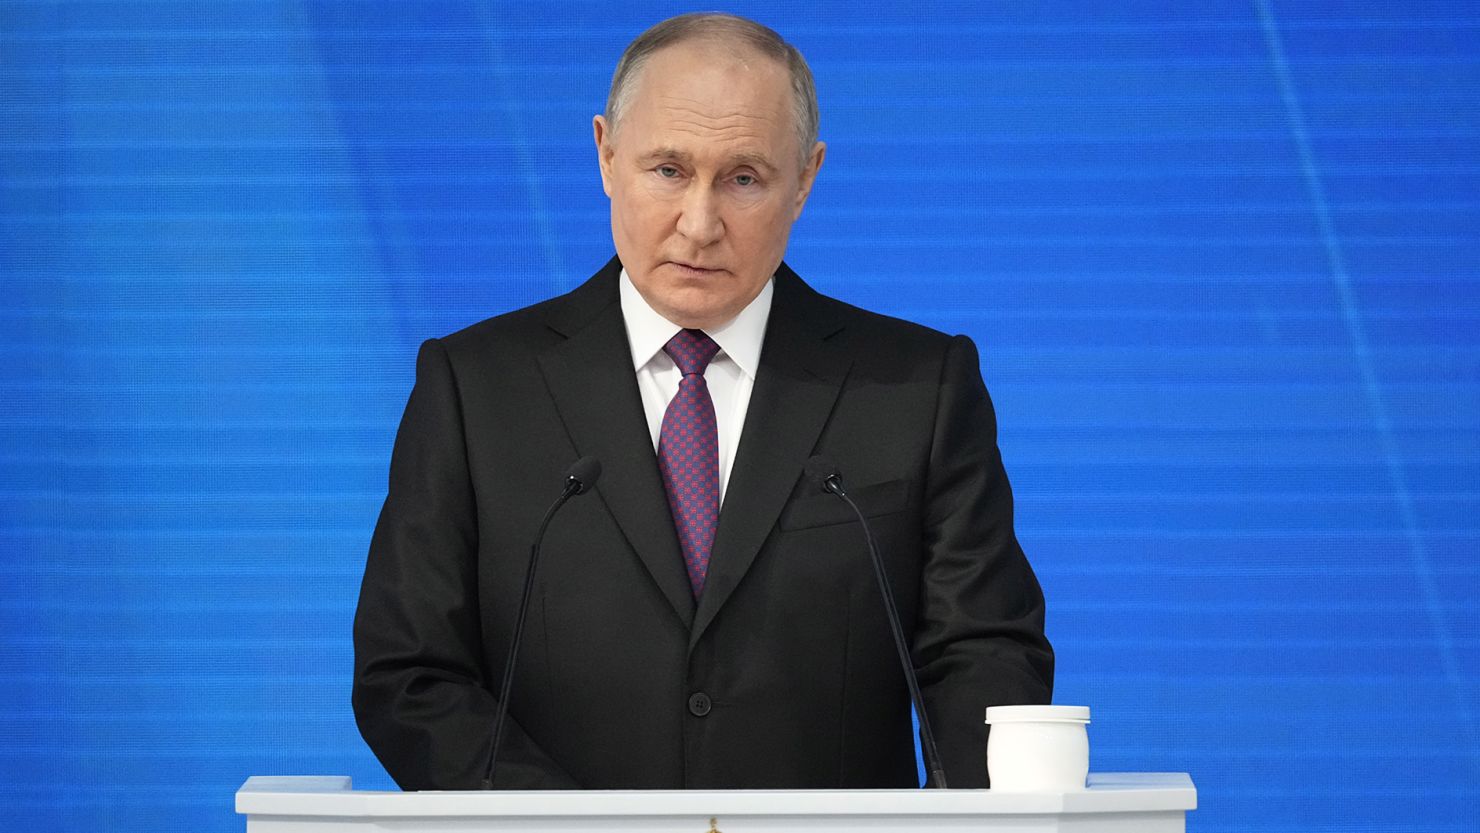 Putin revisited some familiar themes as he gave his annual state of the nation address, delivered ahead of next month's presidential election.